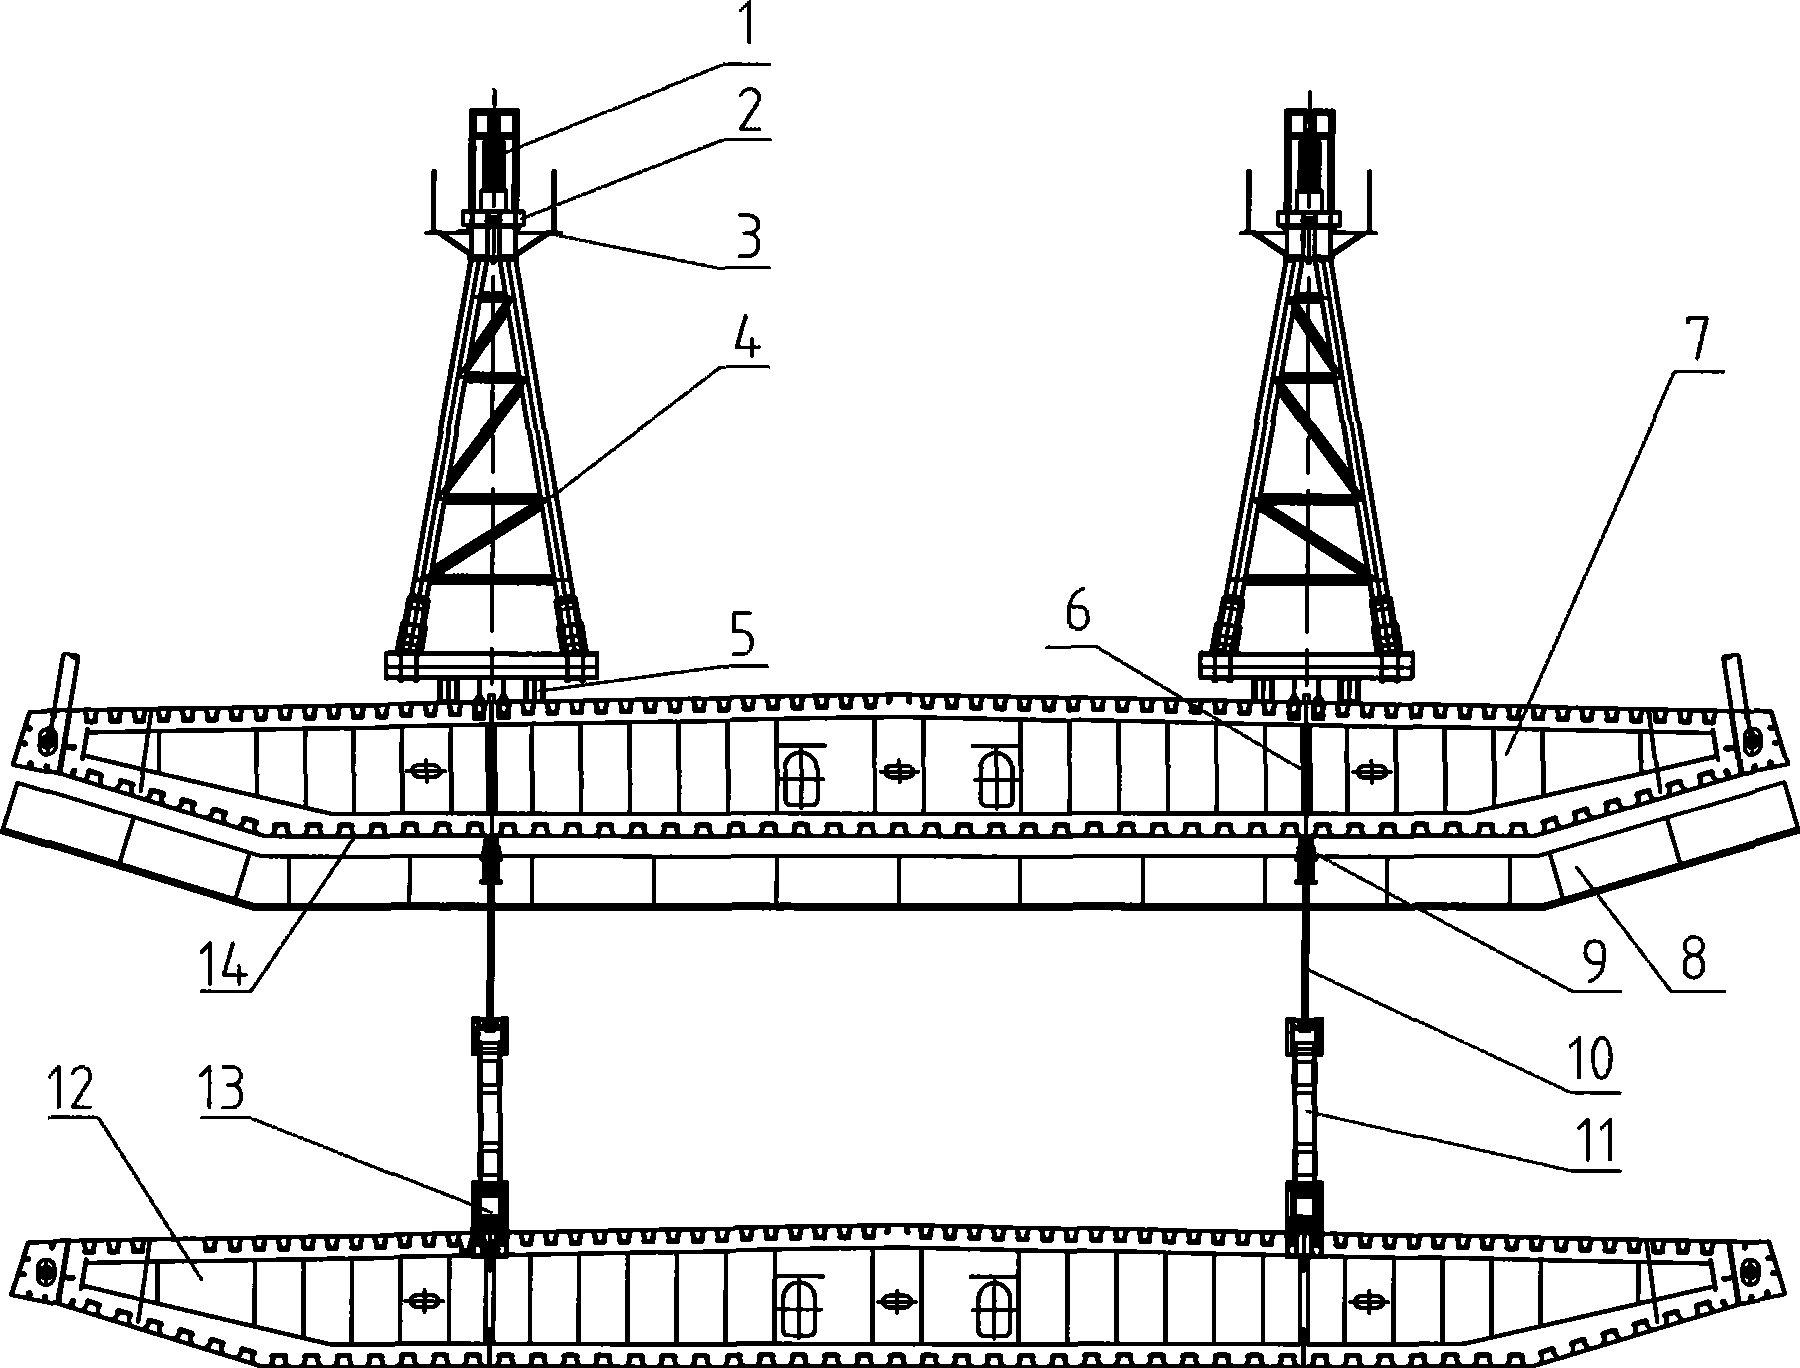 Construction methods of hanging beam and assembling cantilever in the bottom of steel case beam